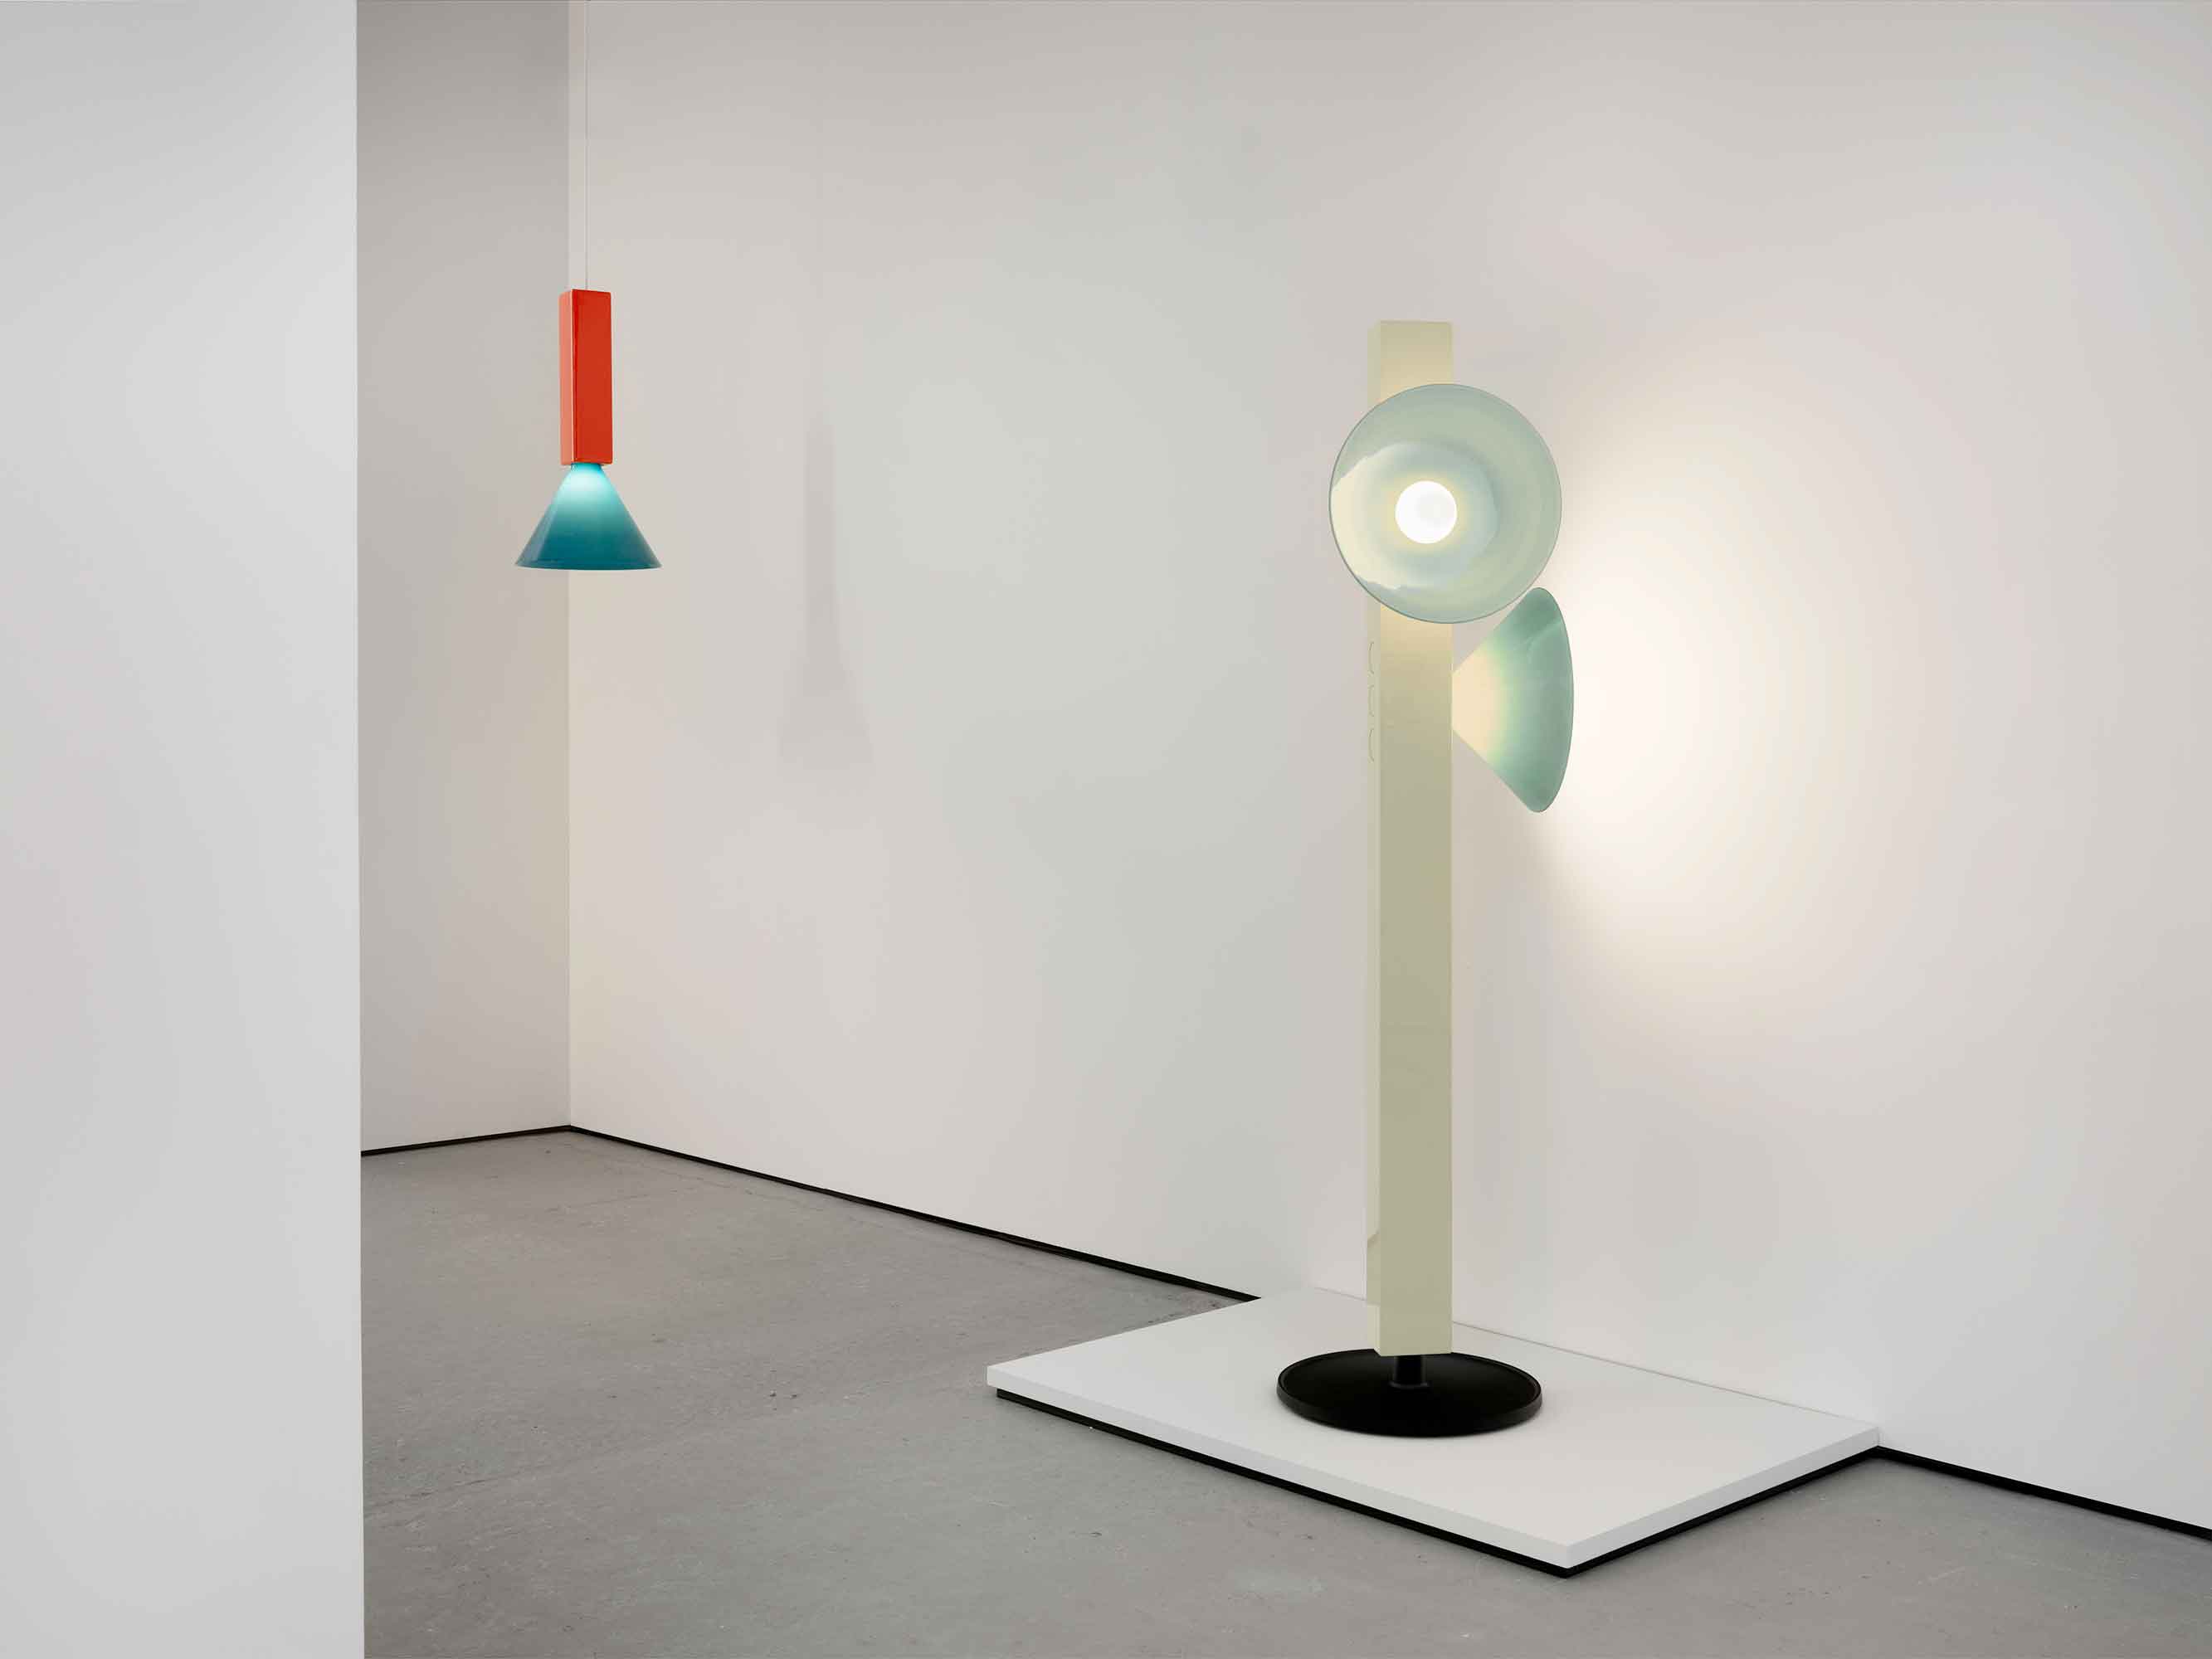 news/barber-osgerby-s-latest-exhibition-at-galerie-kreo-signals-user-interaction